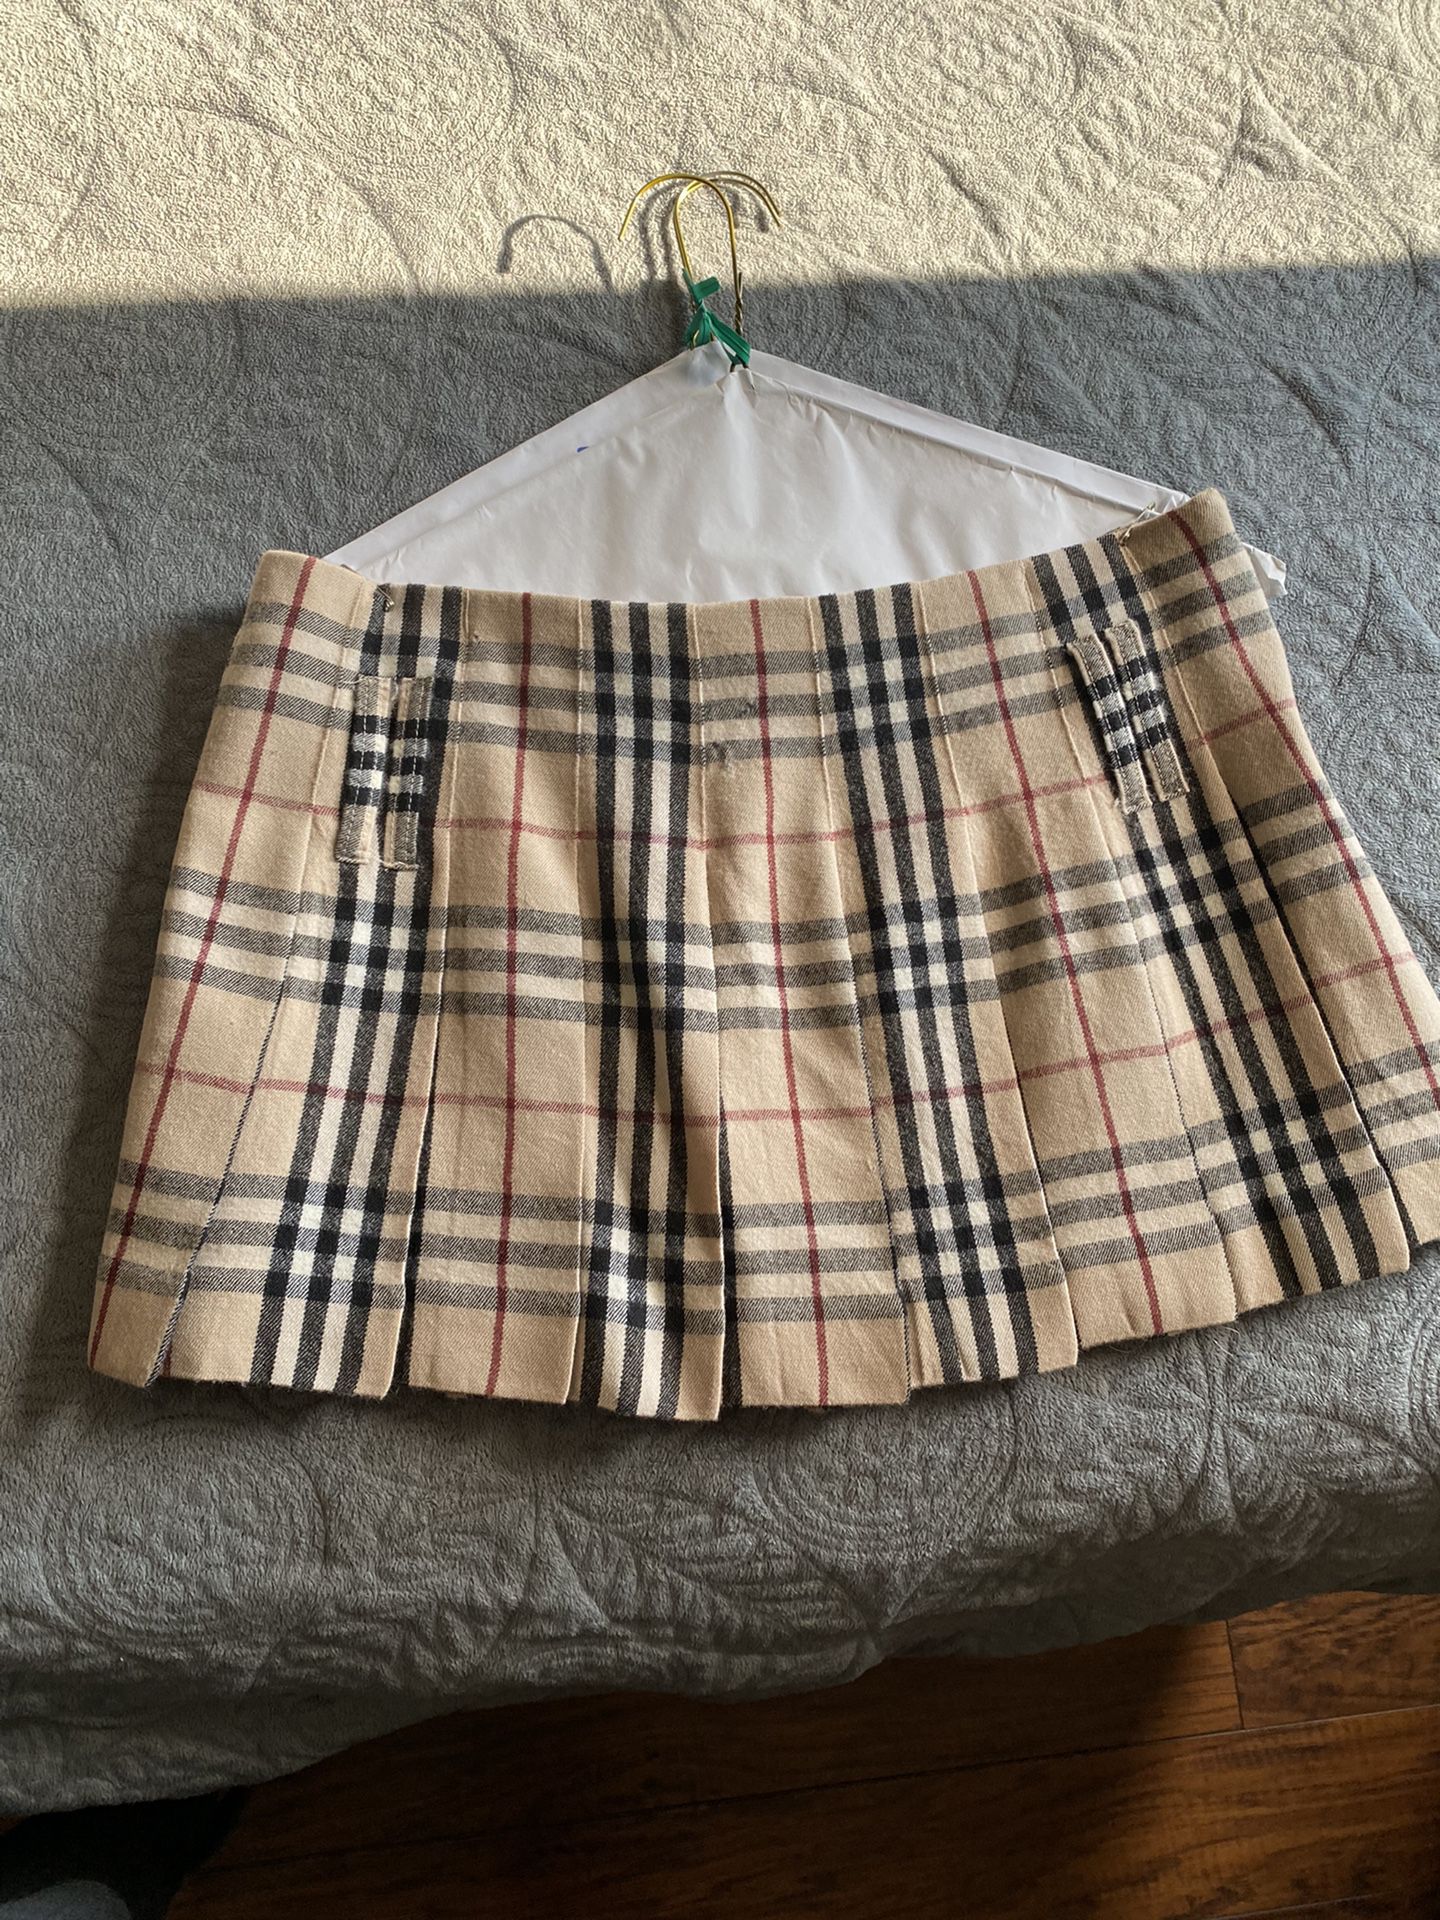 Burberry Authentic Wool Skirt